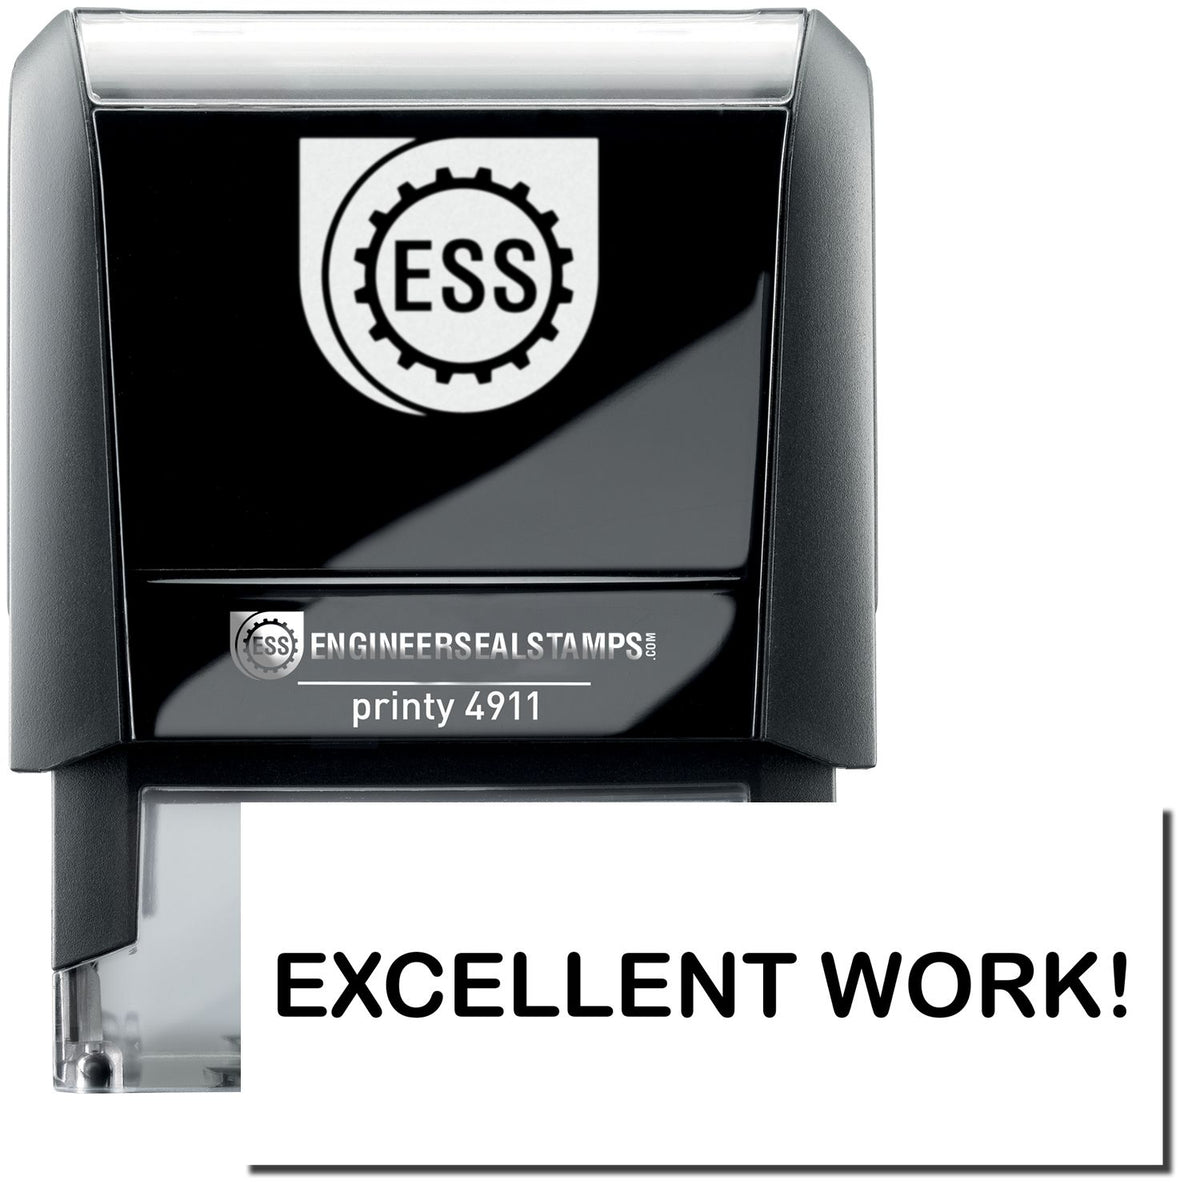 A self-inking stamp with a stamped image showing how the text &quot;EXCELLENT WORK!&quot; is displayed after stamping.